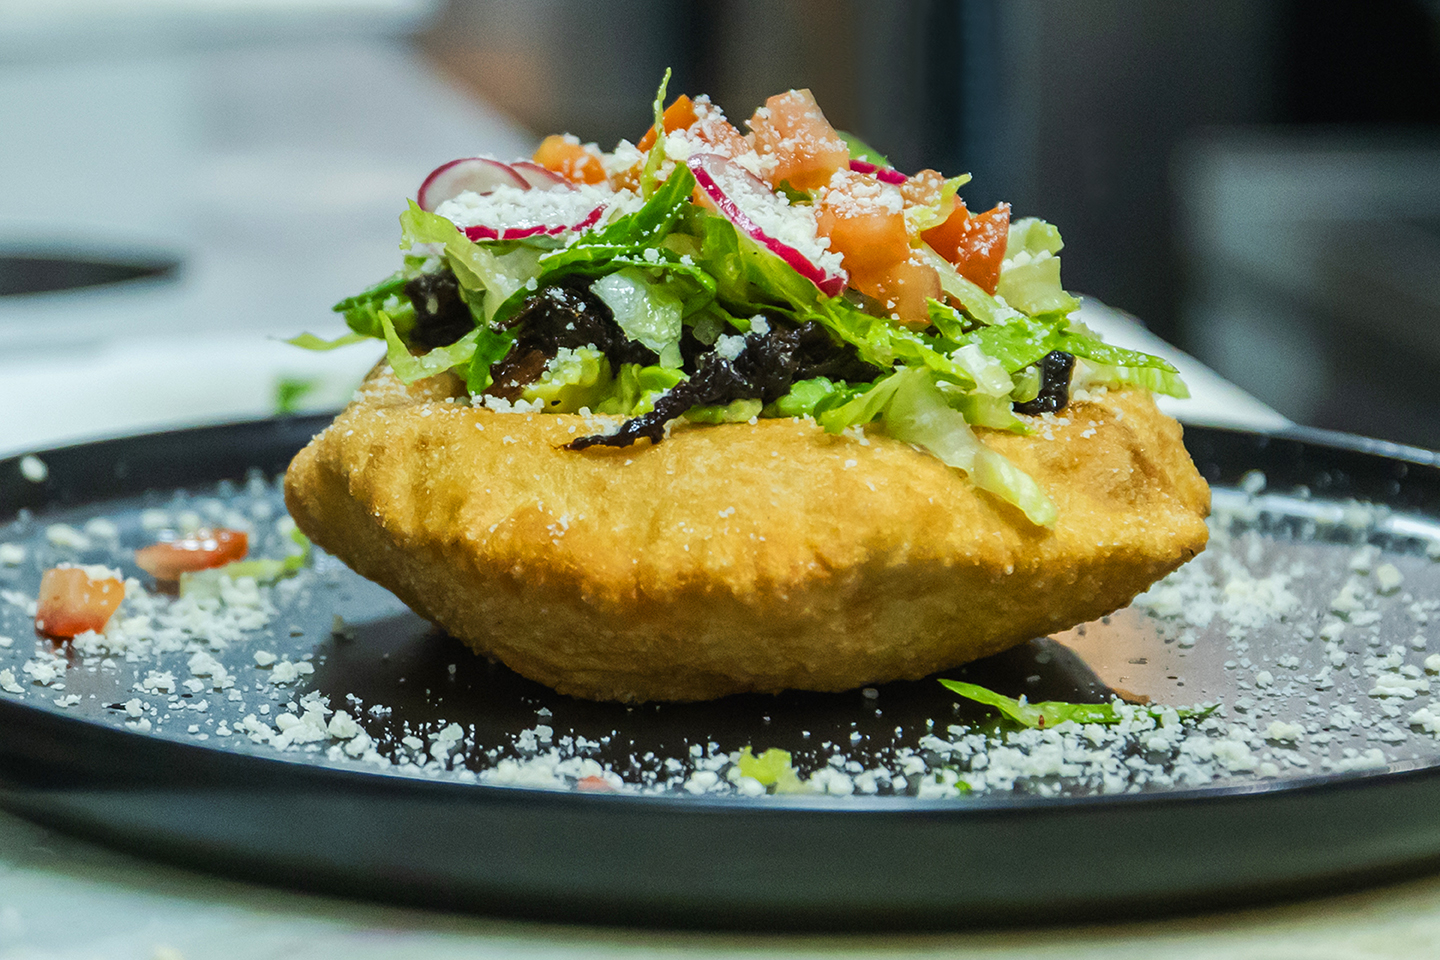 Our Fry Bread offers a local twist on a classic Native American dish.